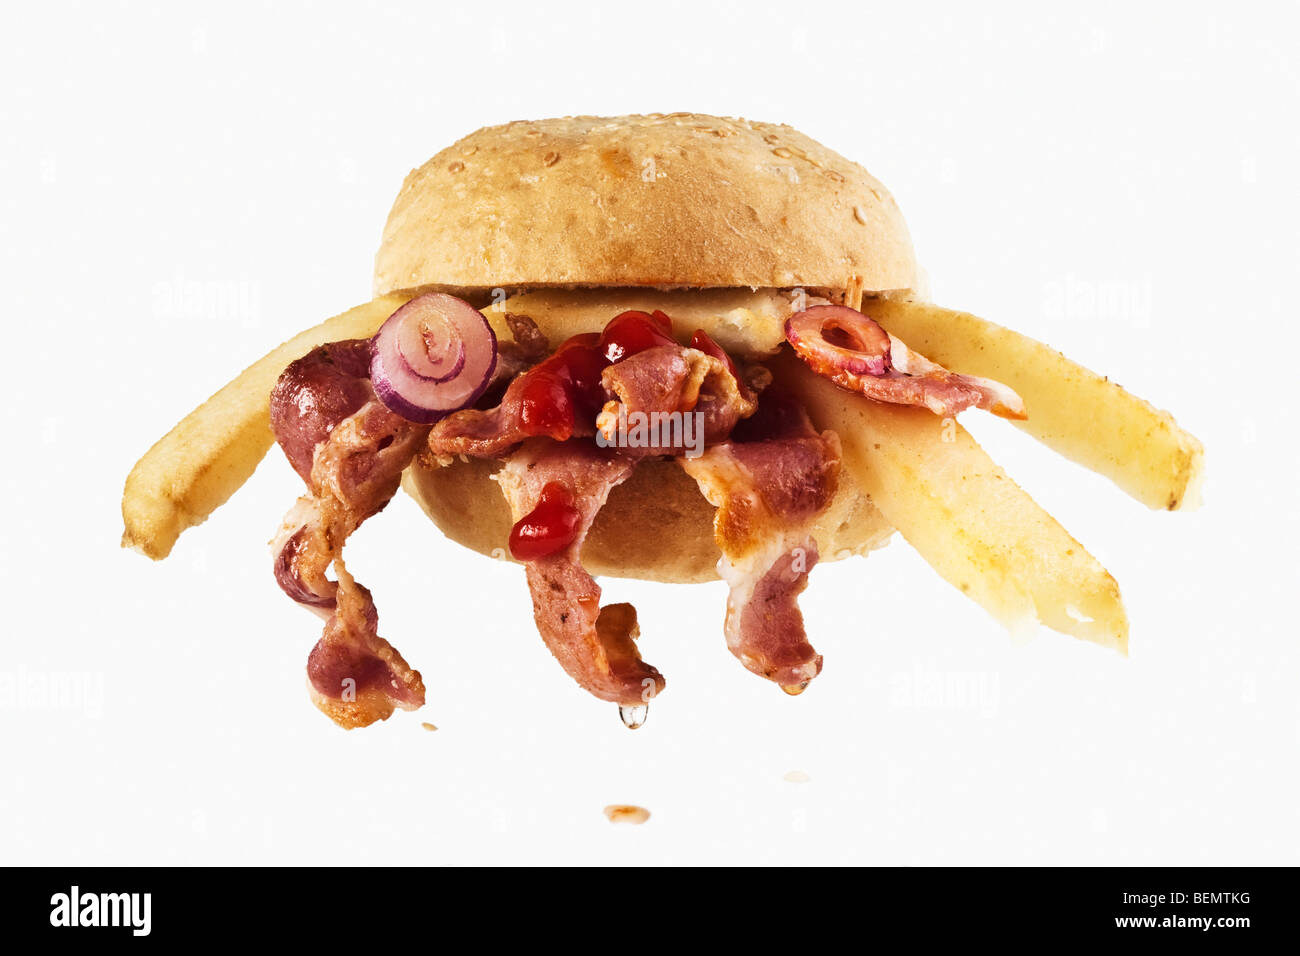 Bread Roll filled with Bacon and Chips Stock Photo